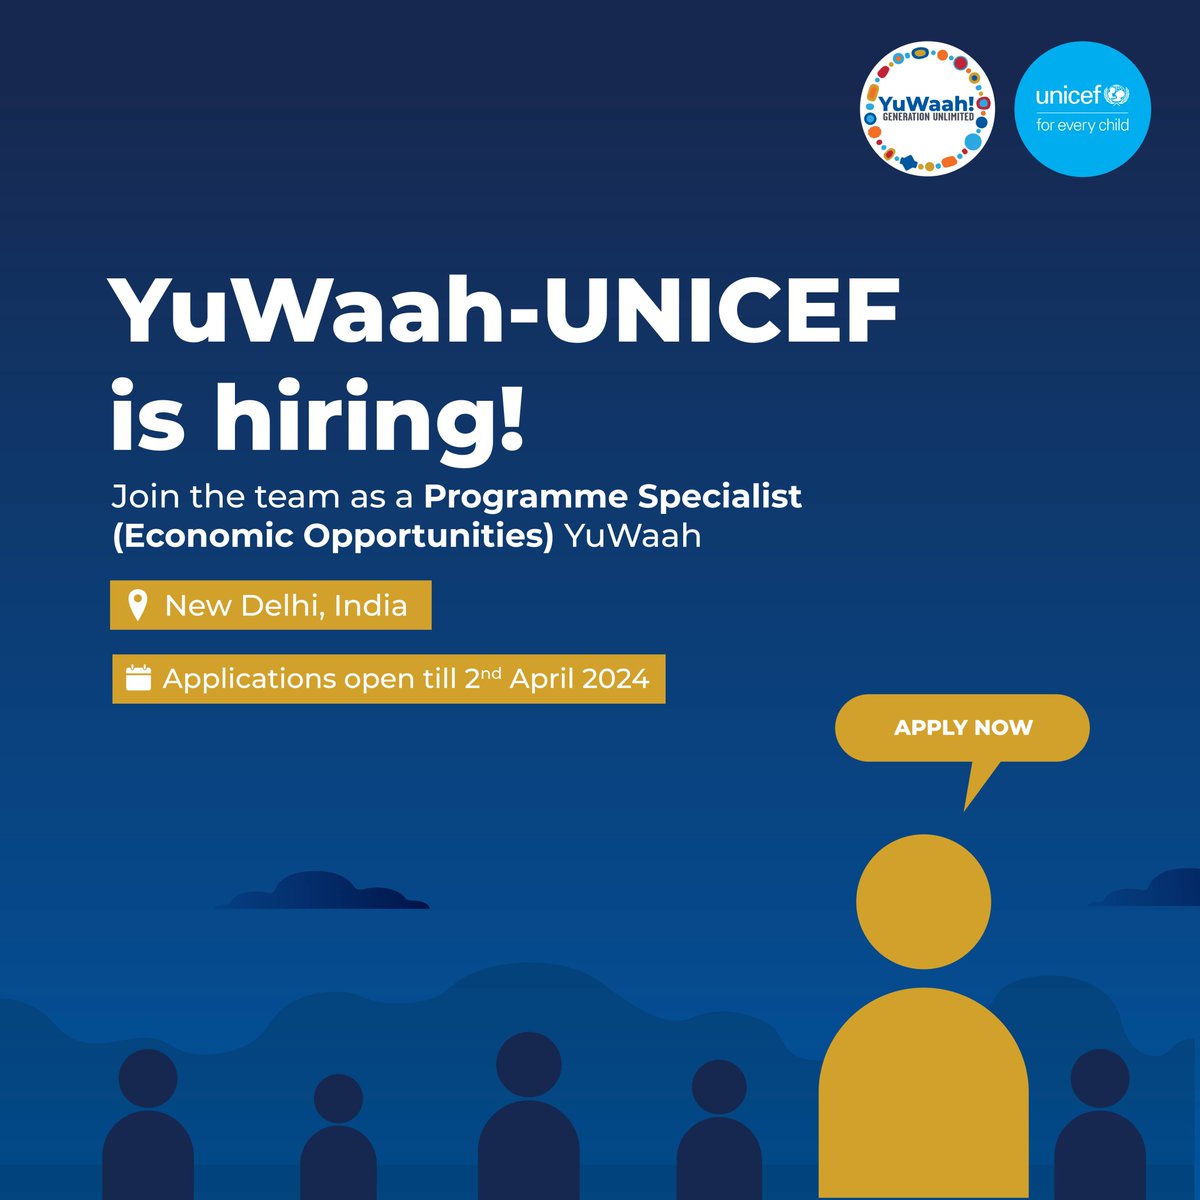 You have a notification!🔔

Calling all changemakers to create #ImpactWithYouth!

🔍Explore new horizons as a Programme Specialist (Economic Opportunities).

📍New Delhi, India
⏰ Apply by 2nd April 2024

Don't miss out! Apply now👉tinyurl.com/ms9ew4fh

#Vacancy #WorkWithUs